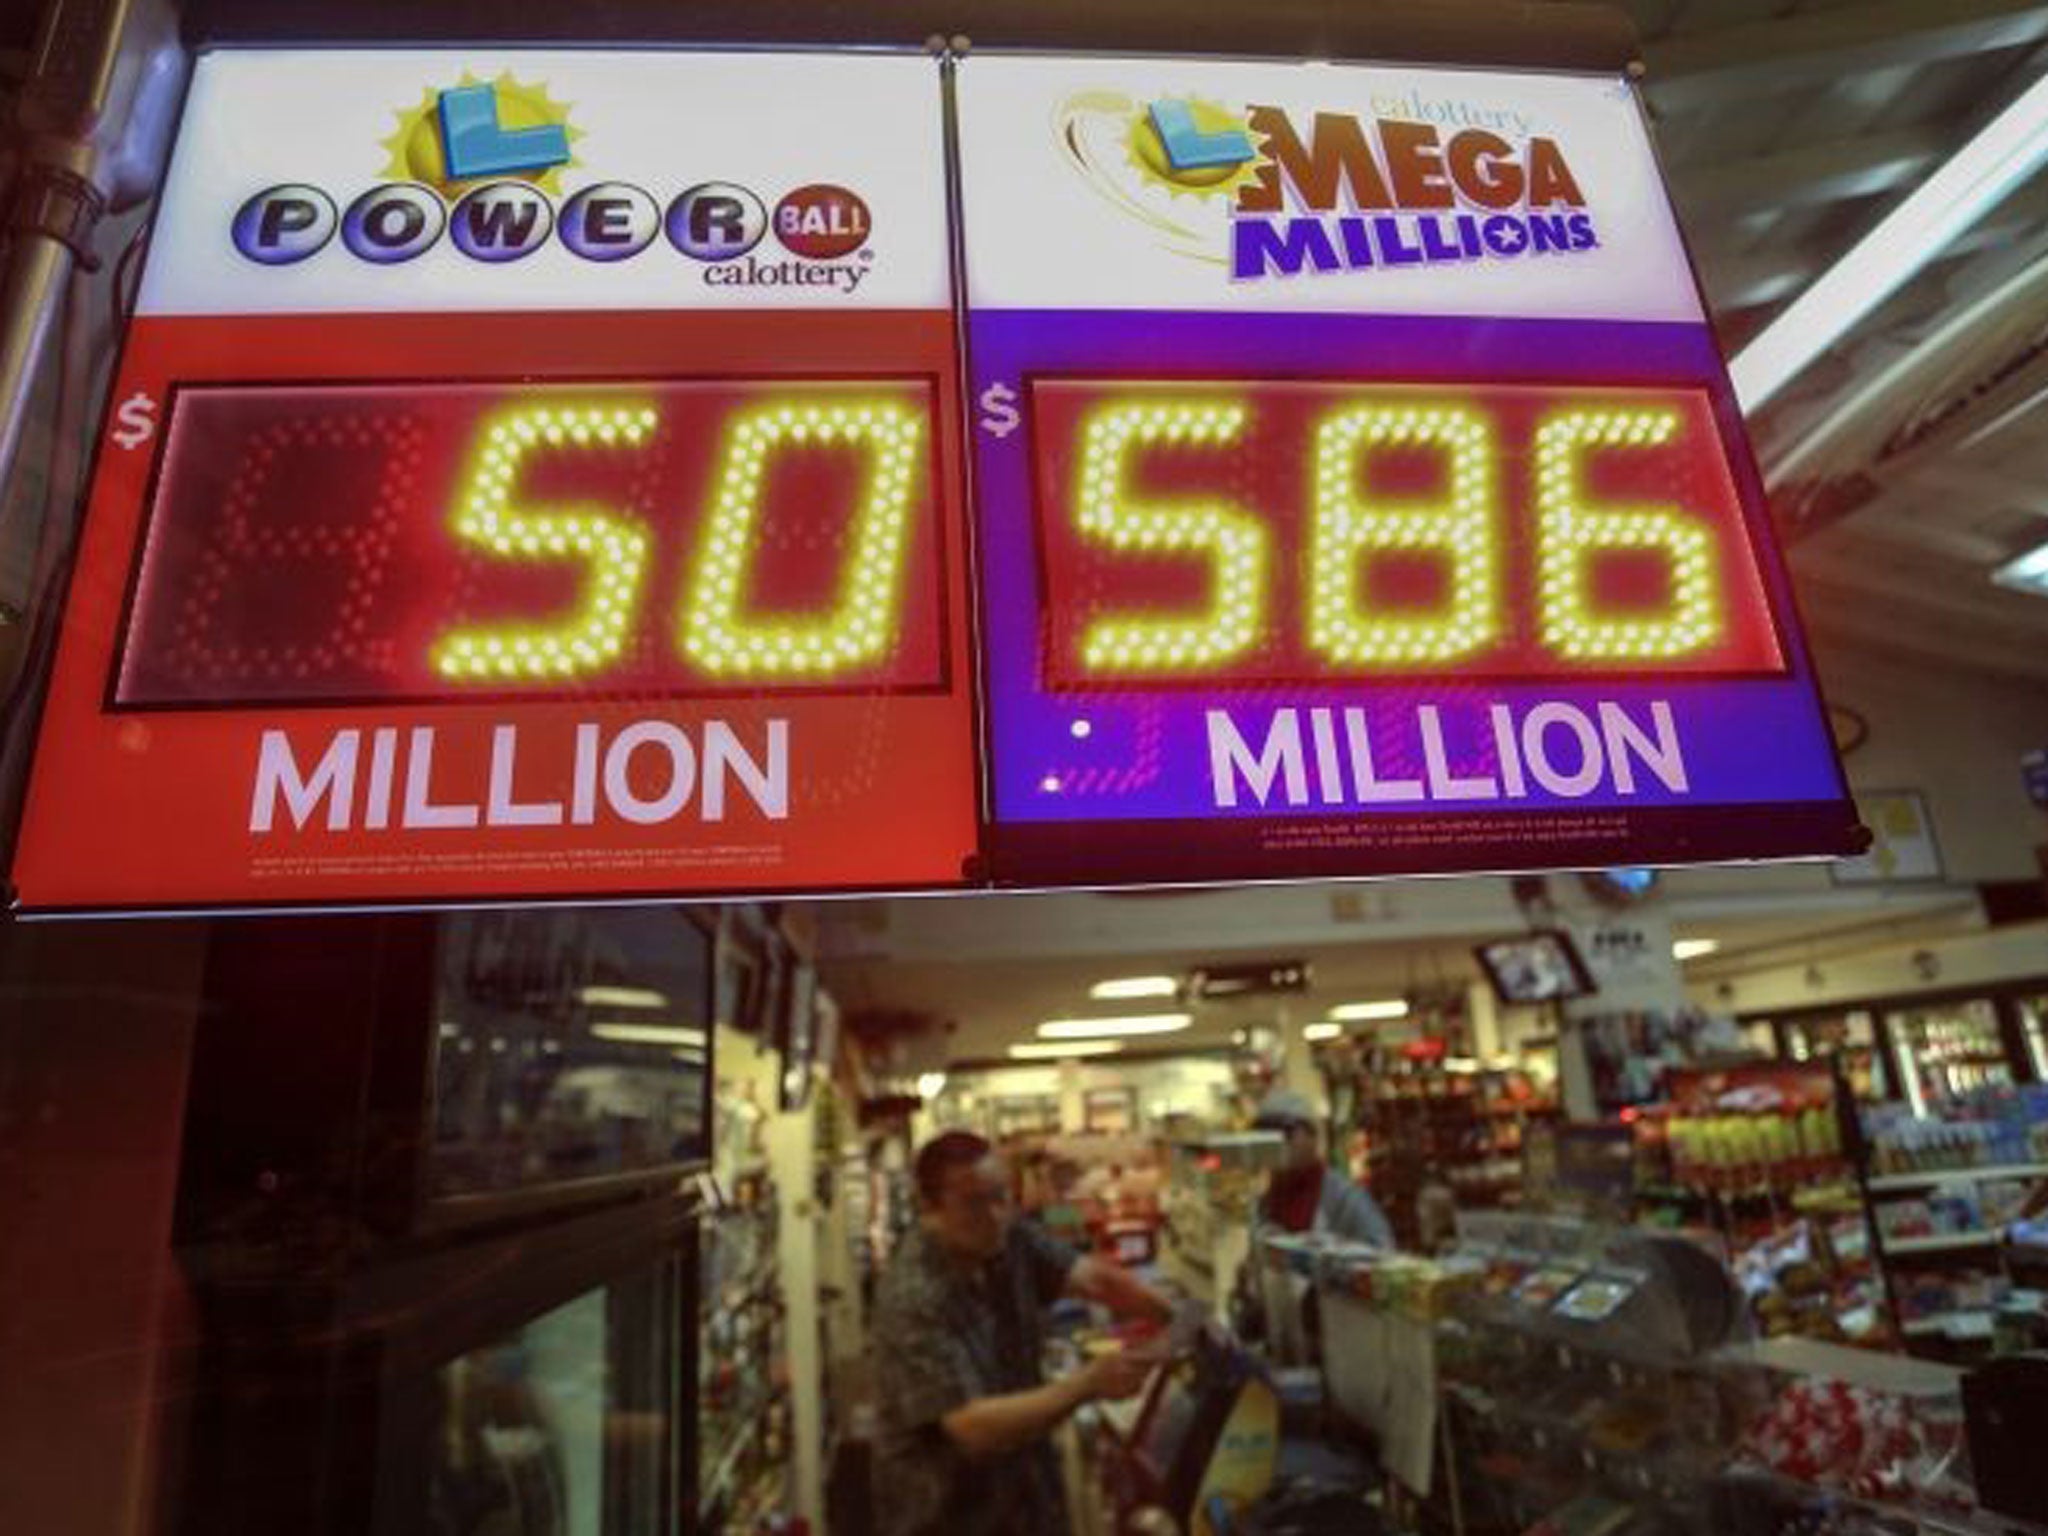 A worker at Nick's Liquor Store sells lottery tickets as a sign shows the Mega Millions jackpot estimated at $586 million in Venice, California December 16, 2013. The U.S. Mega Millions jackpot has grown to an estimated $586 million making it the second-l